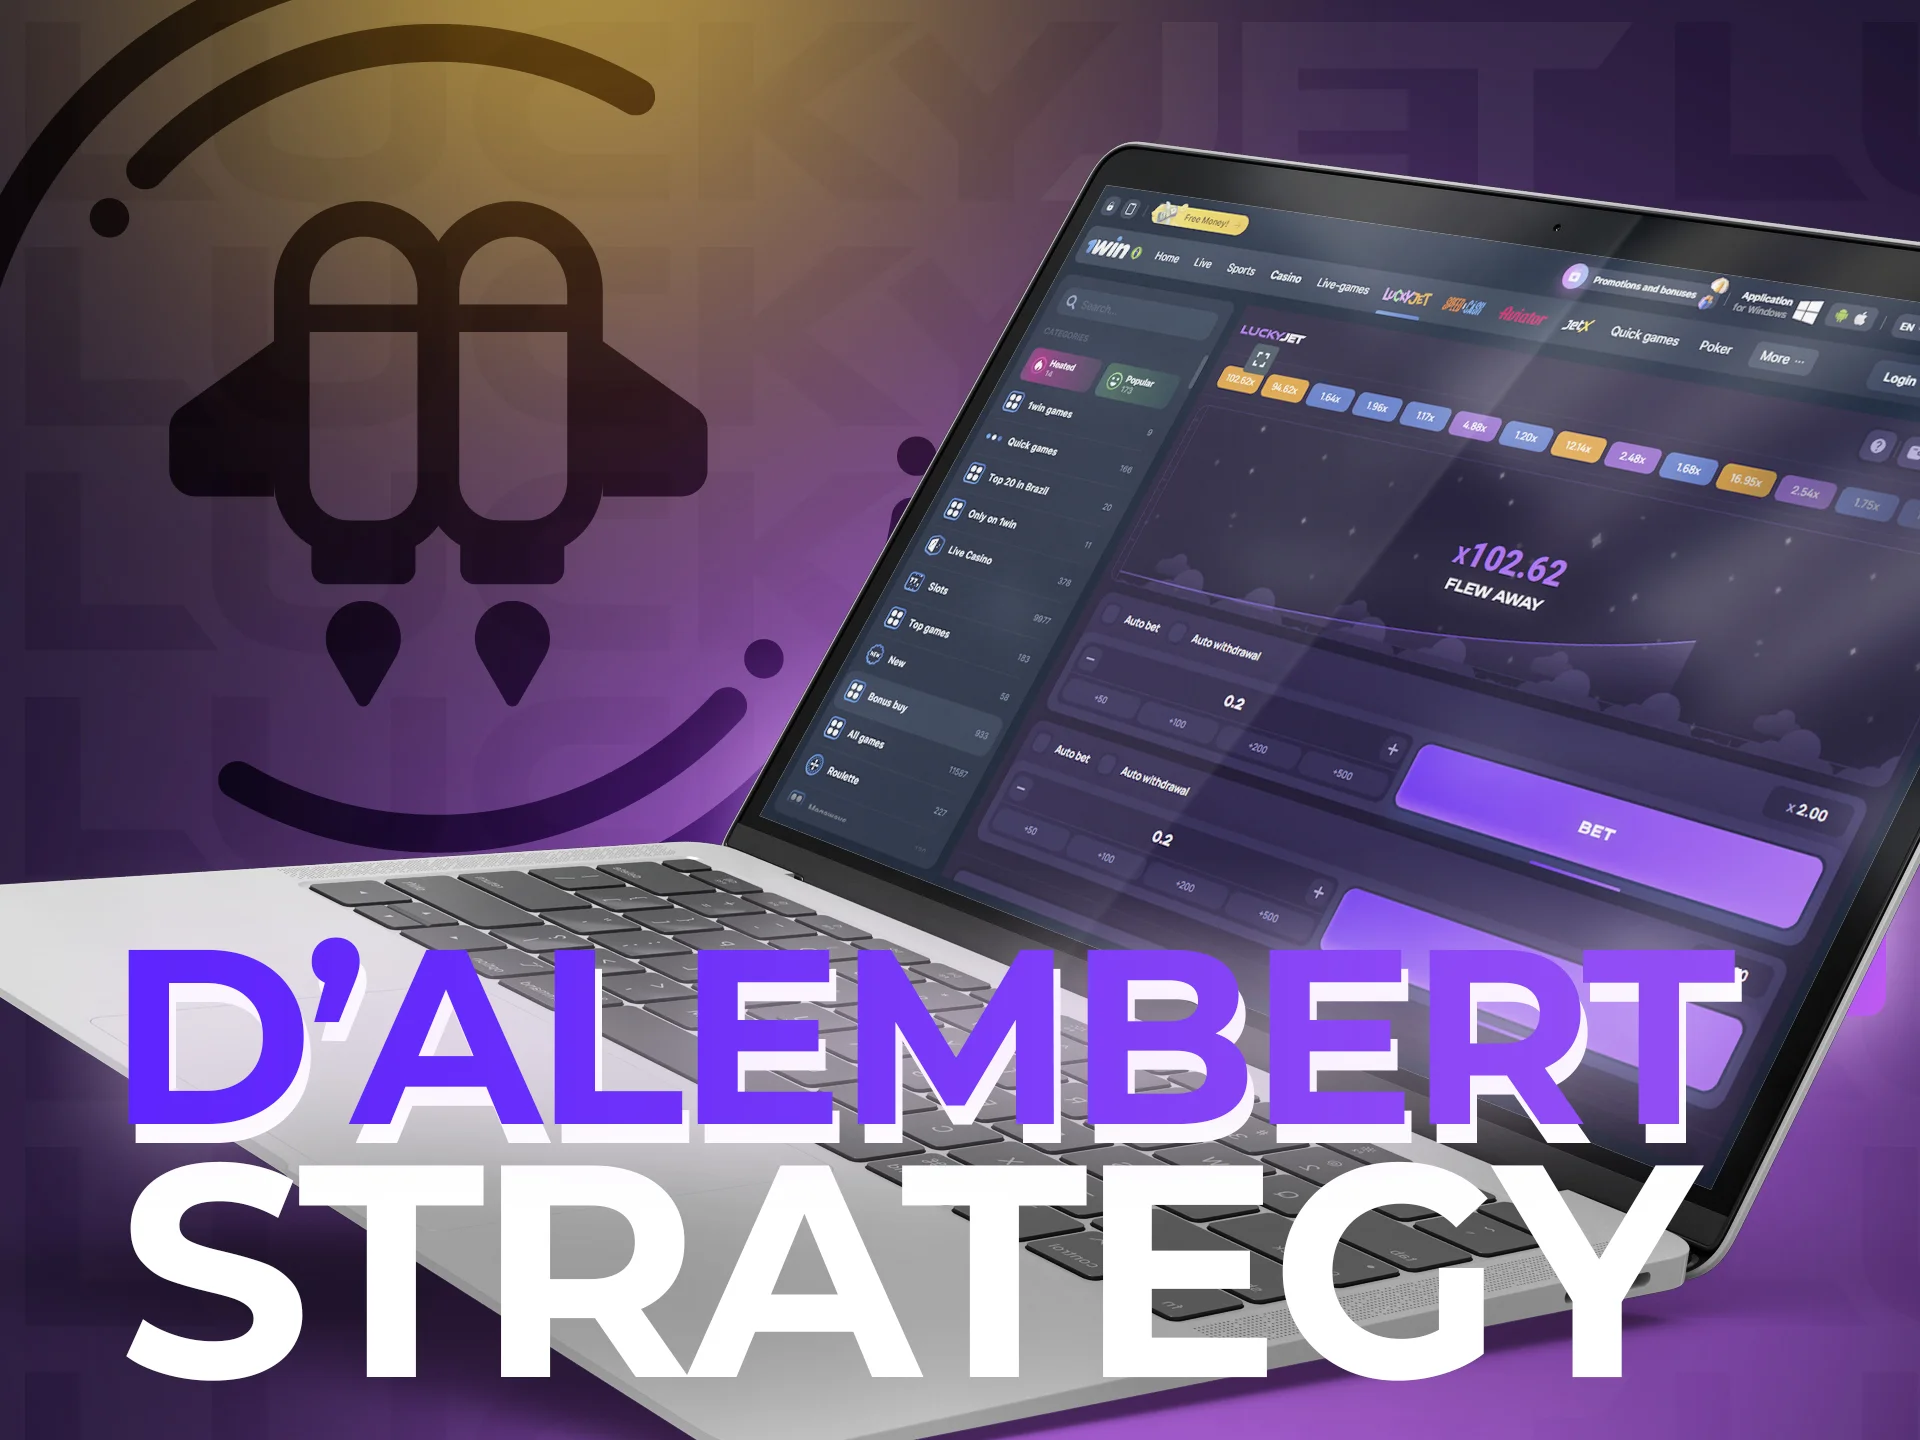 Strategy D'alembert your chance to win the Lucky Jet.